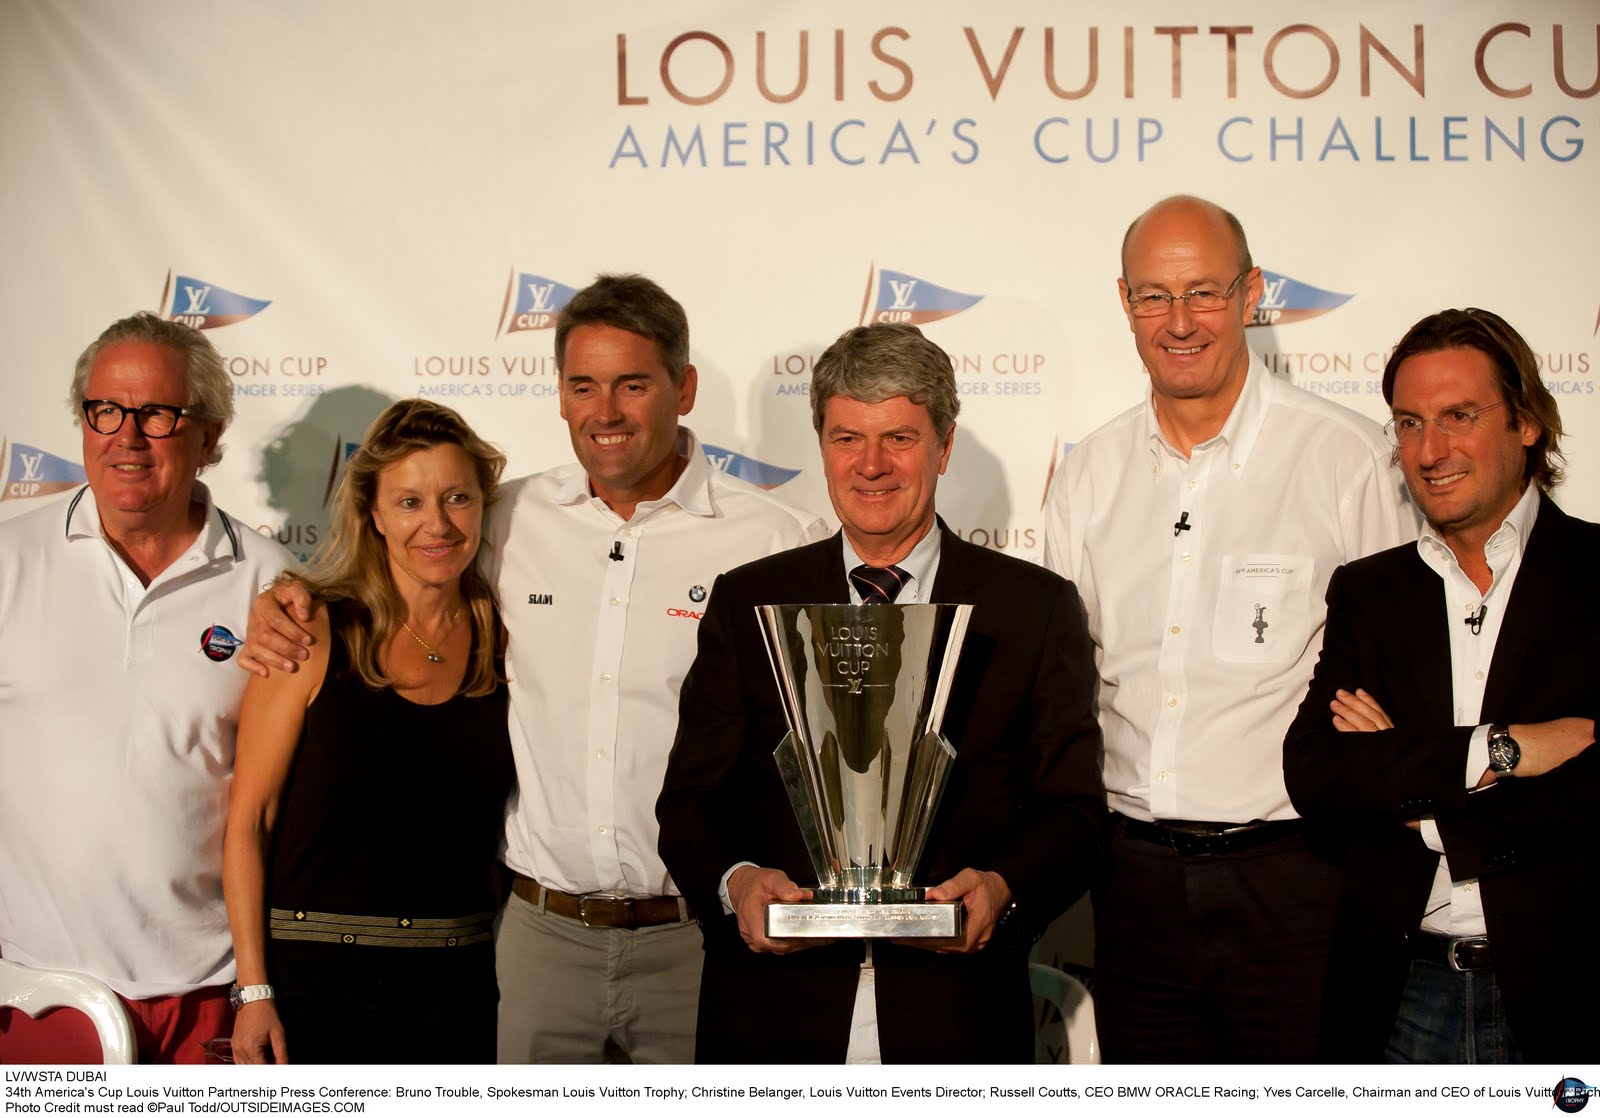 34th America's Cup announces partnership with Louis Vuitton